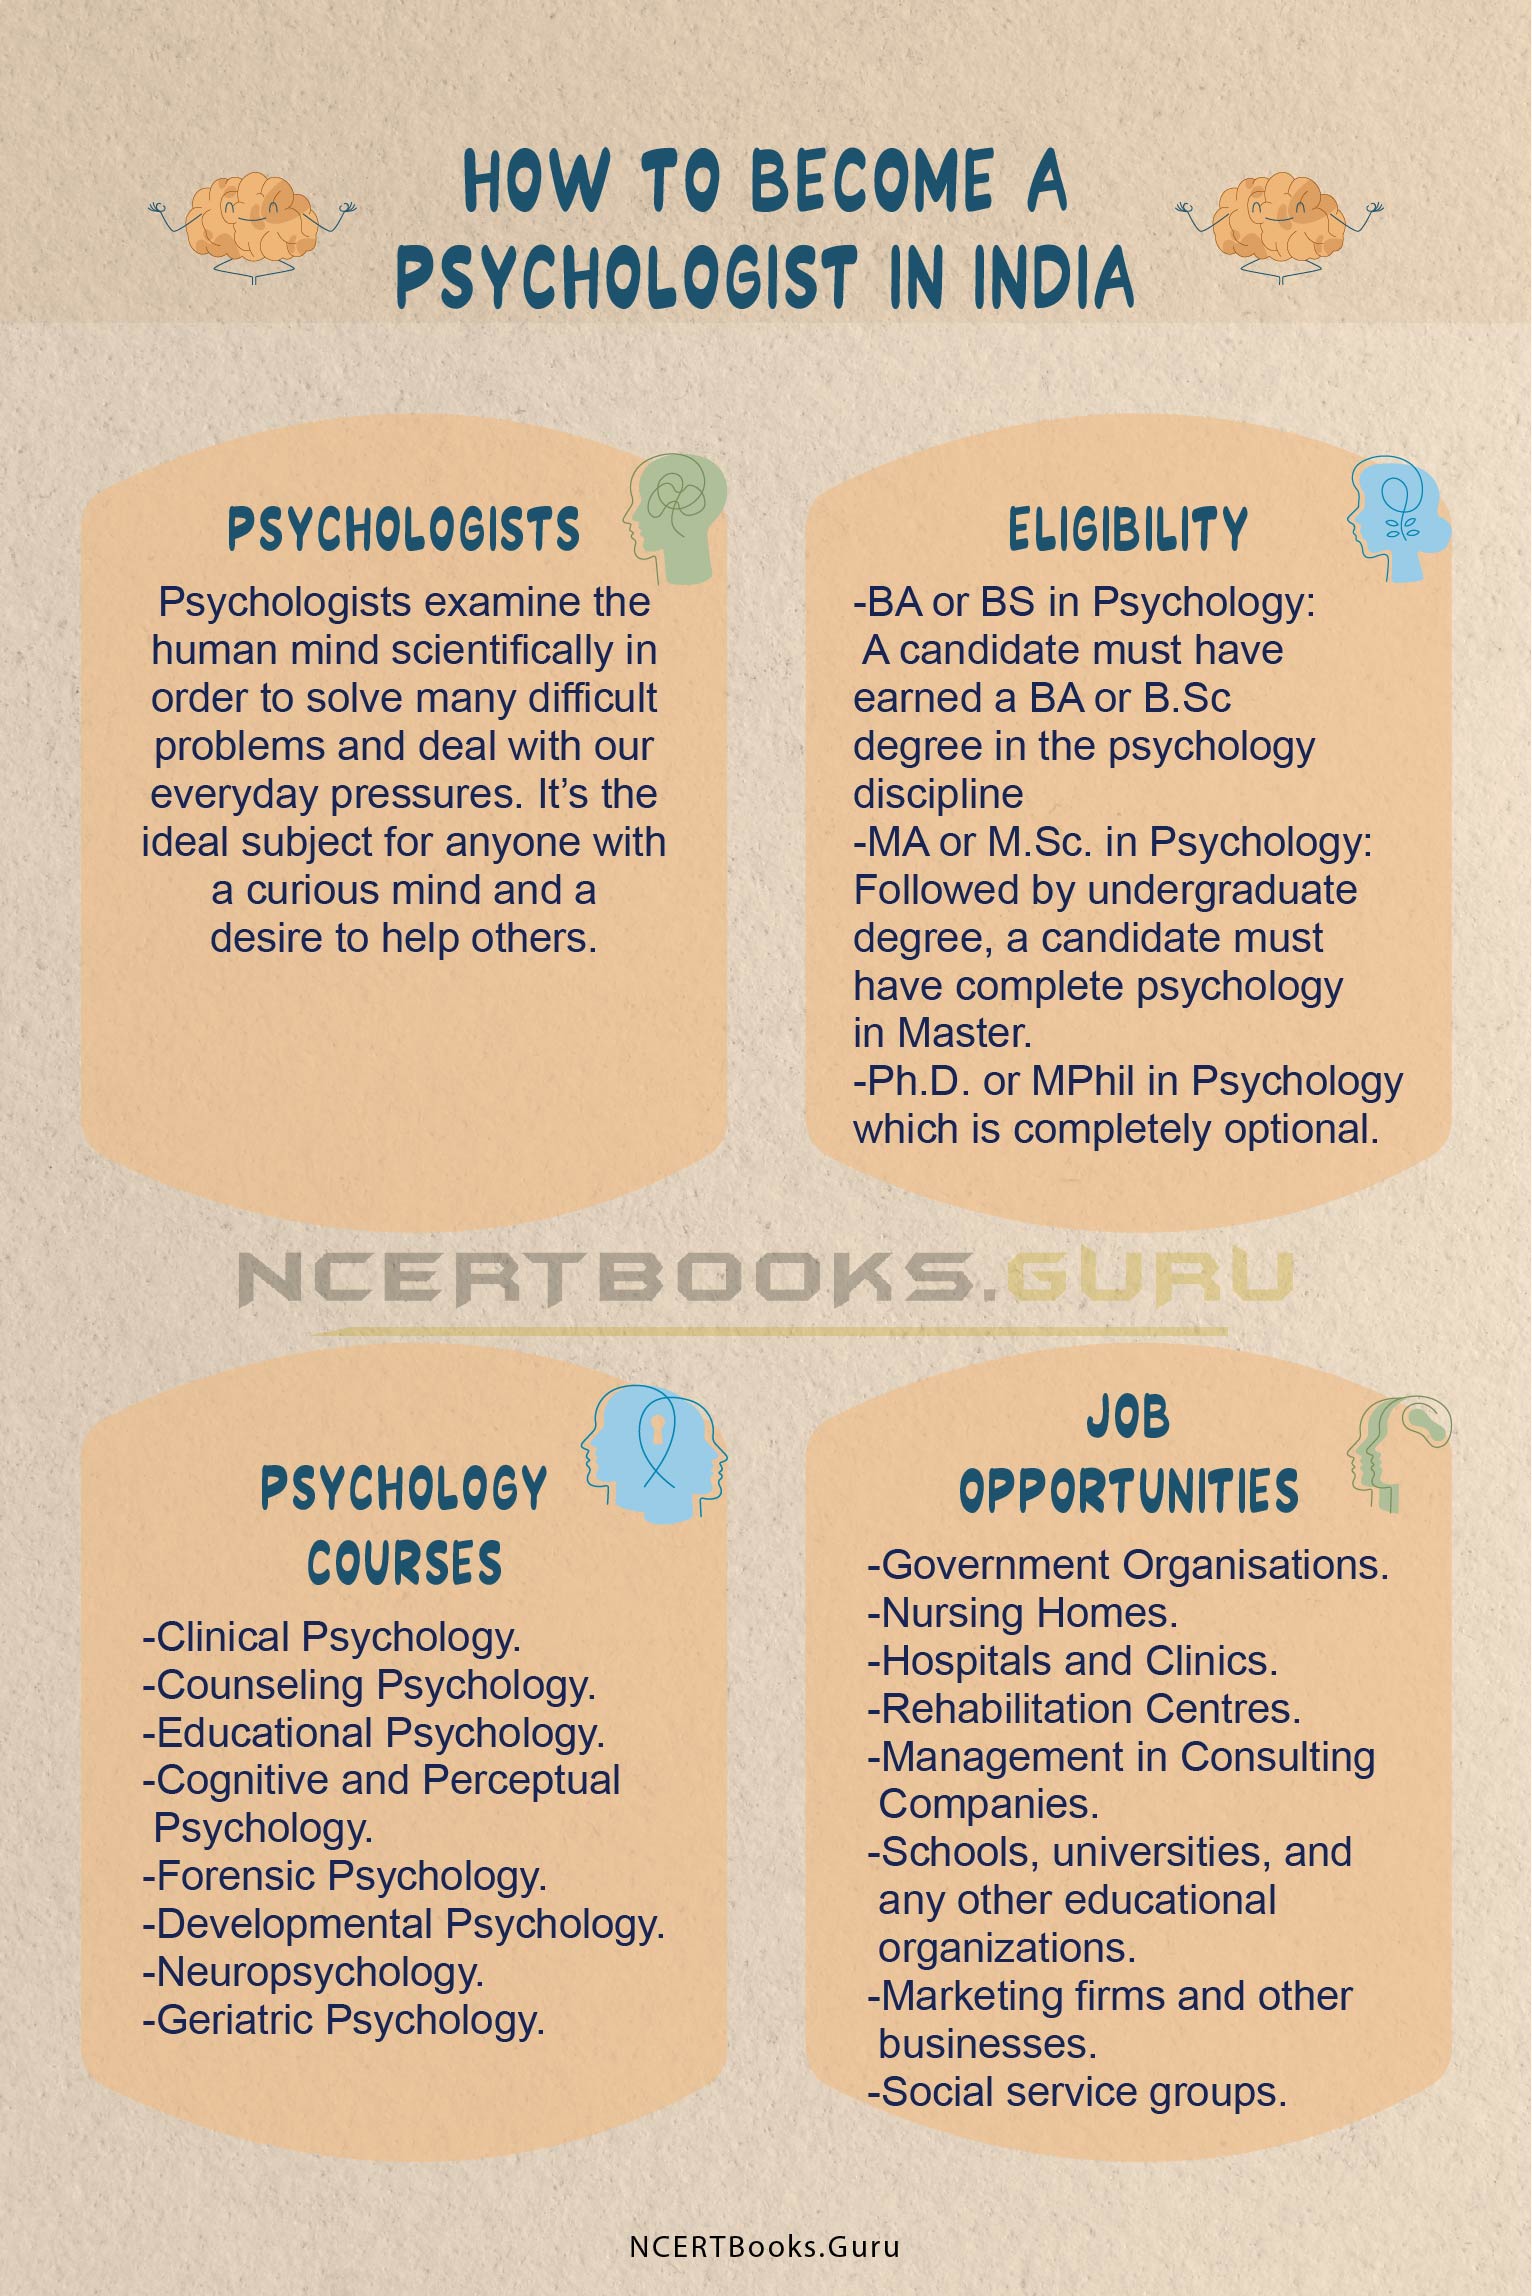 How to become a Psychologist in India